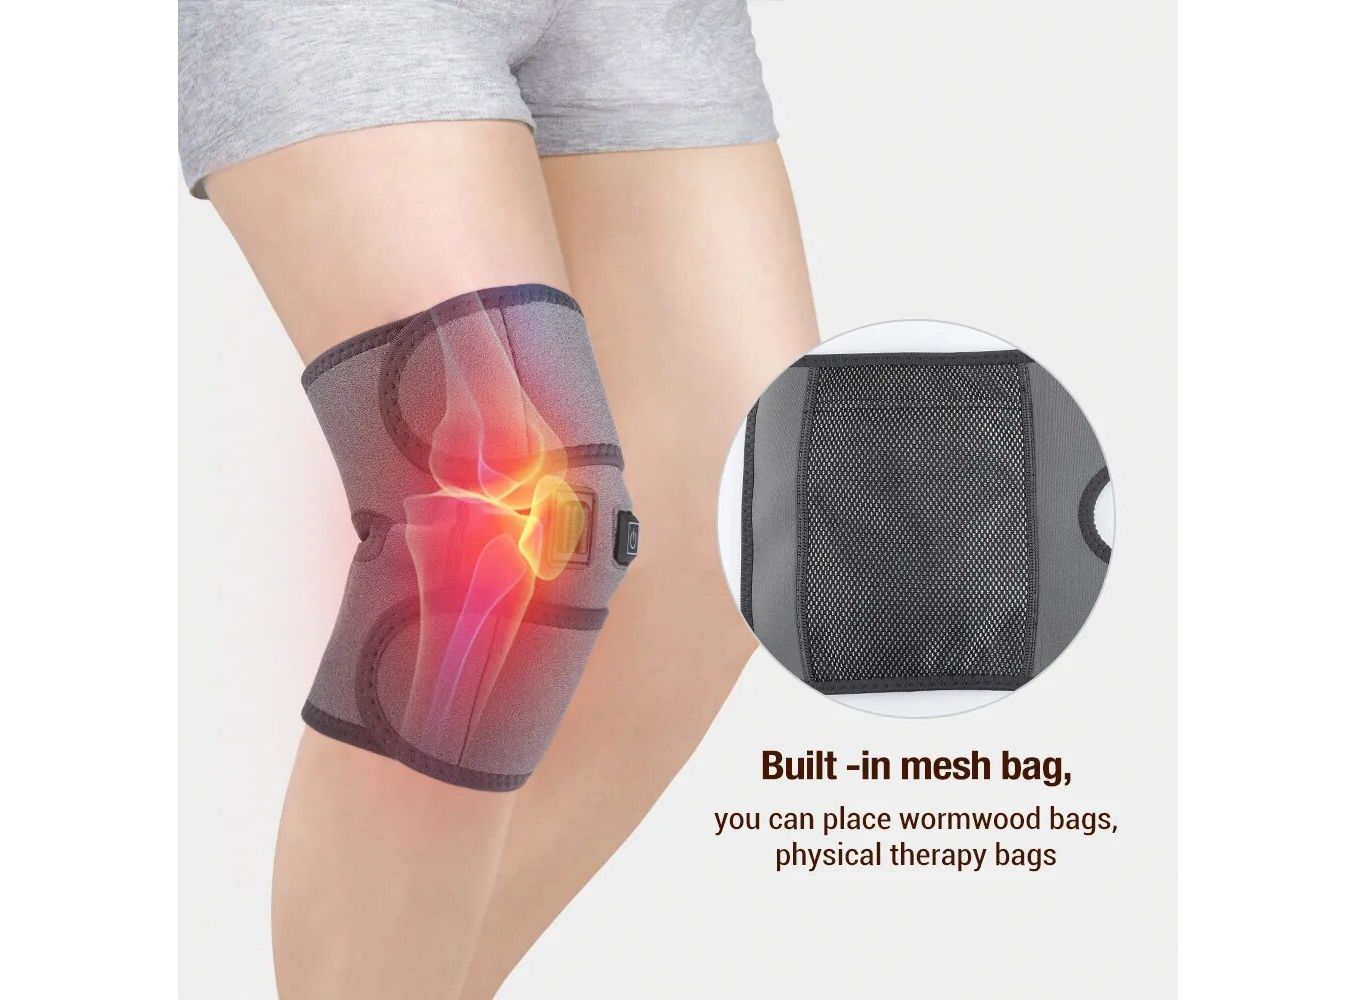 Heated Knee Brace Knee Heating Pad for Arthritis Pain Relief, 3 Temperature  Control Thermal Therapy